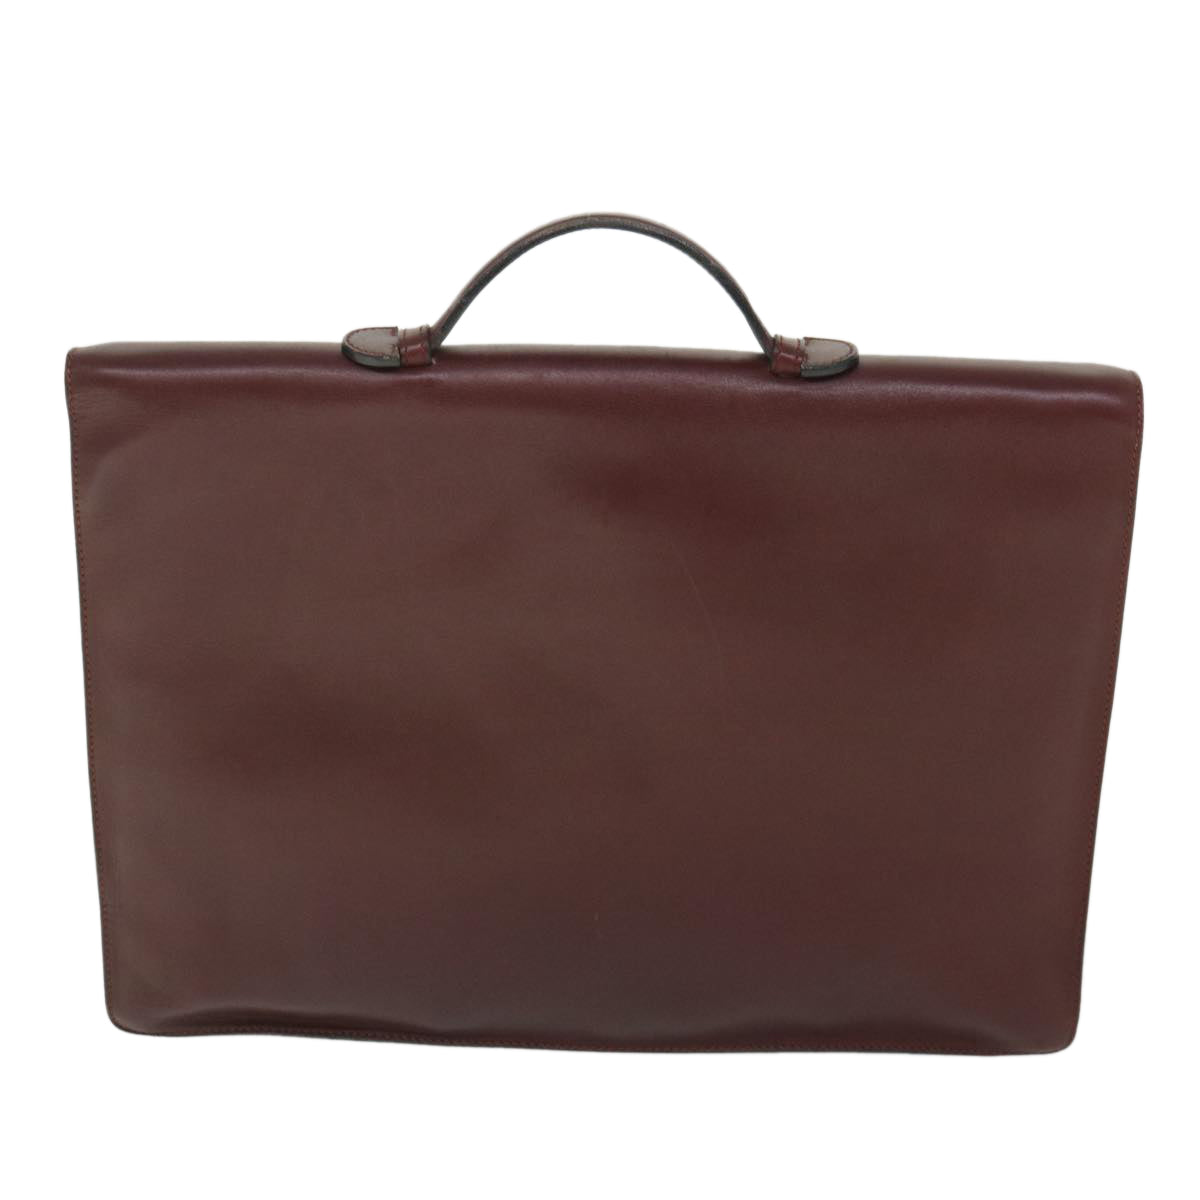 CARTIER Business Bag Leather Wine Red Auth bs8739 - 0